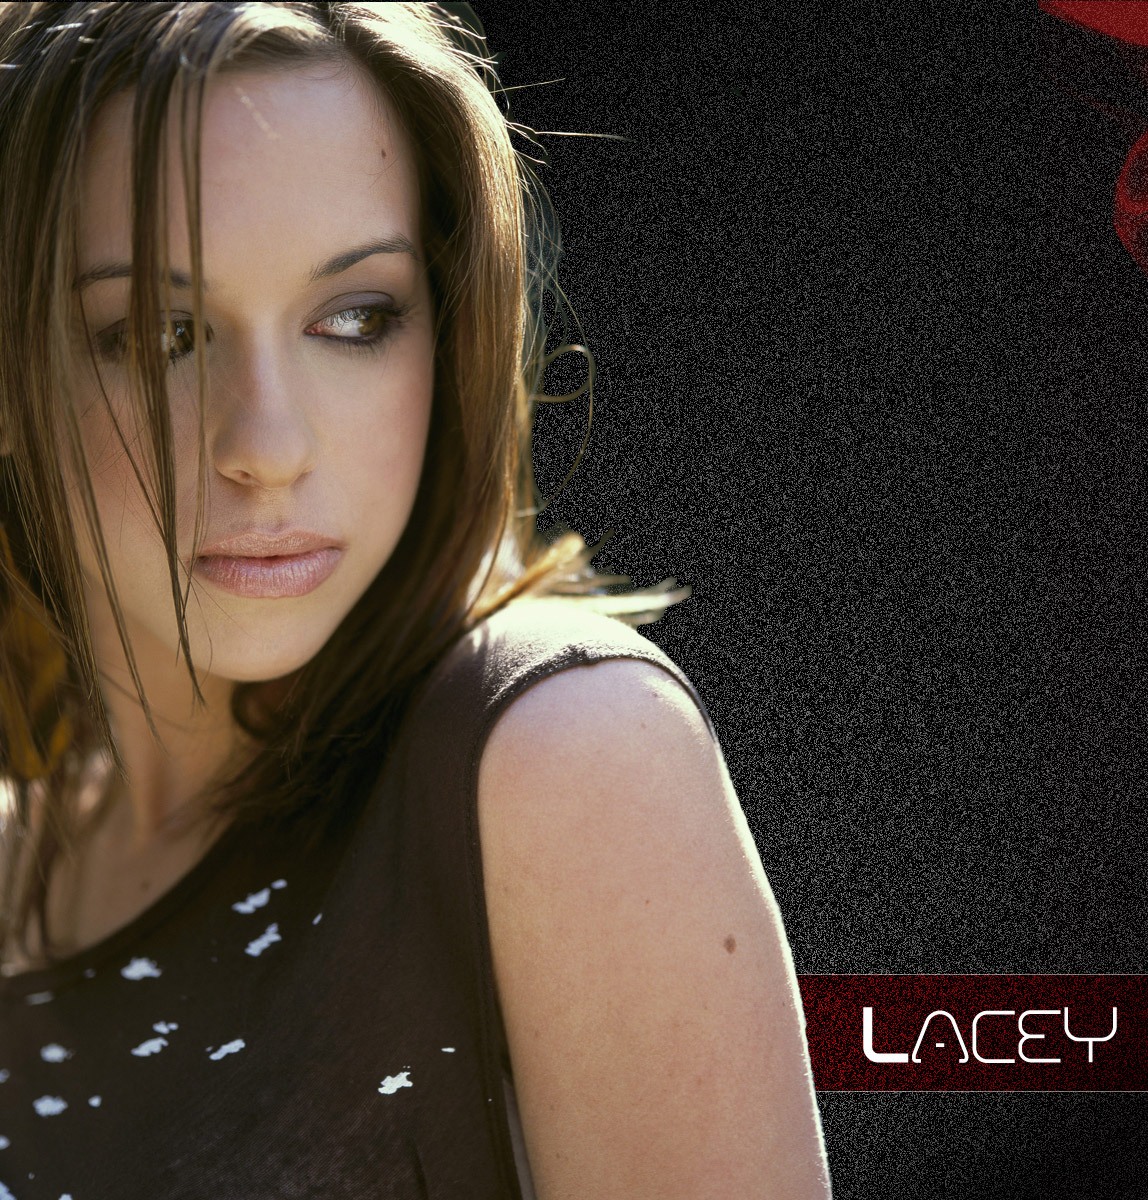 Lady gaga: Lacey Chabert Hot Wallpapers Collection